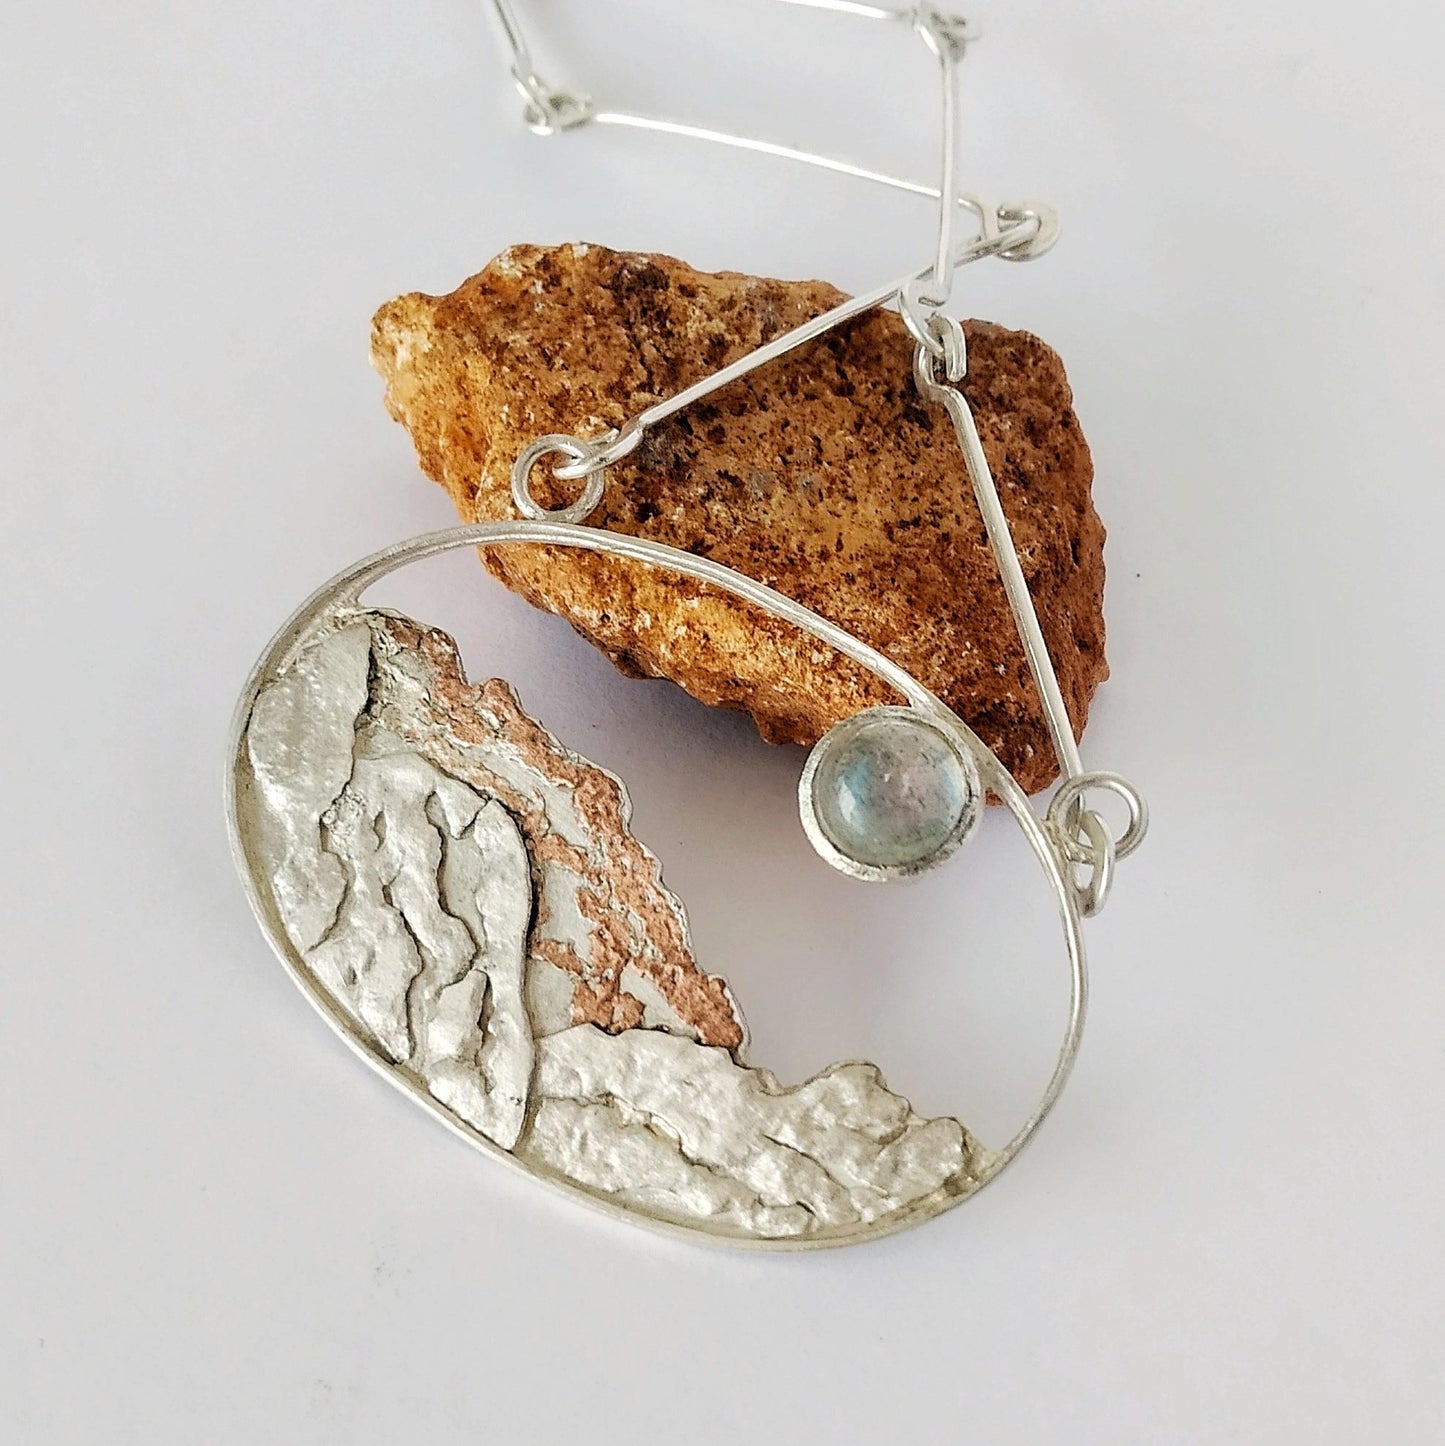 A silver pendant with copper and a moonstone representing a landscape under the moon